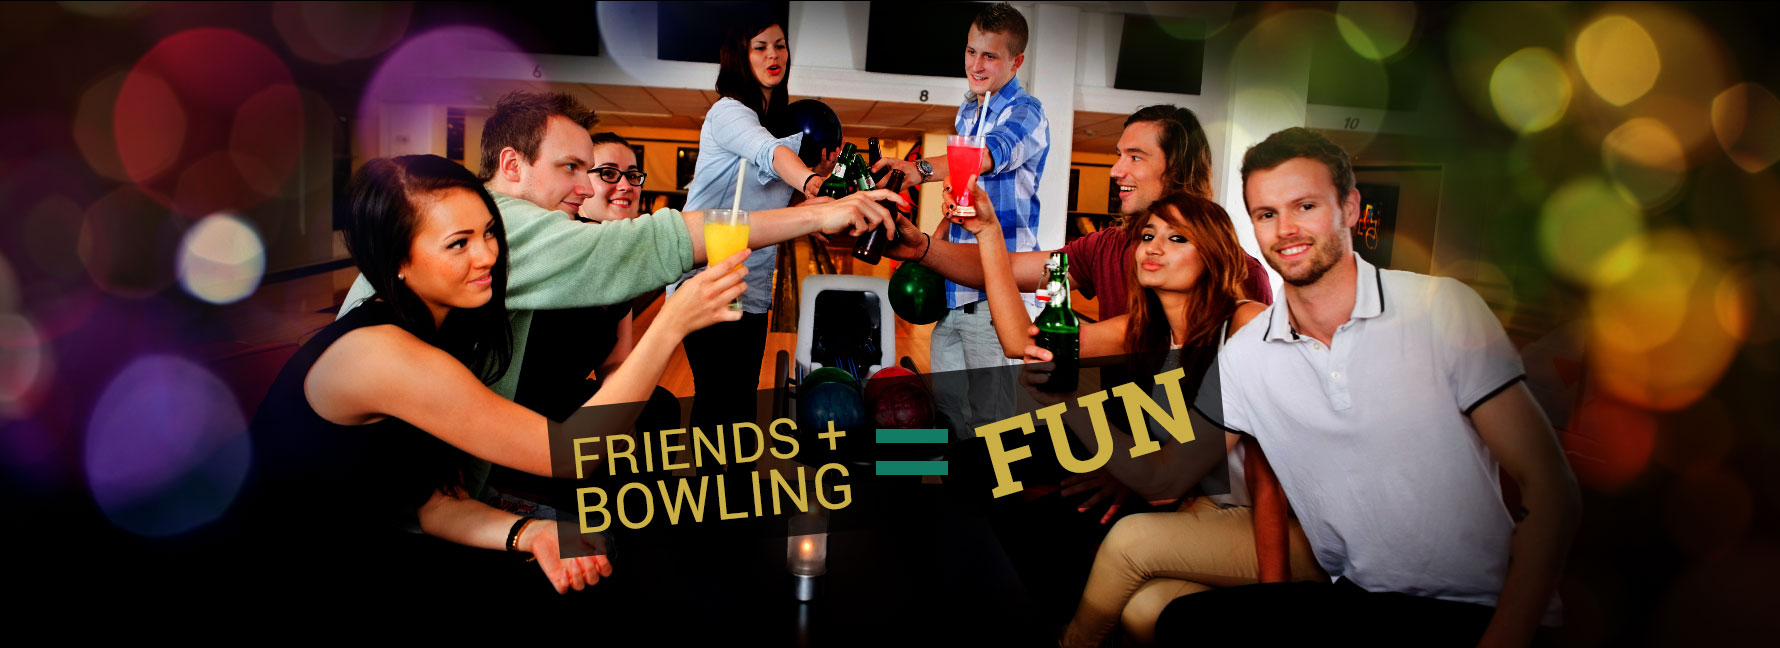 Friends + Bowing = Fun, Friends drinking together